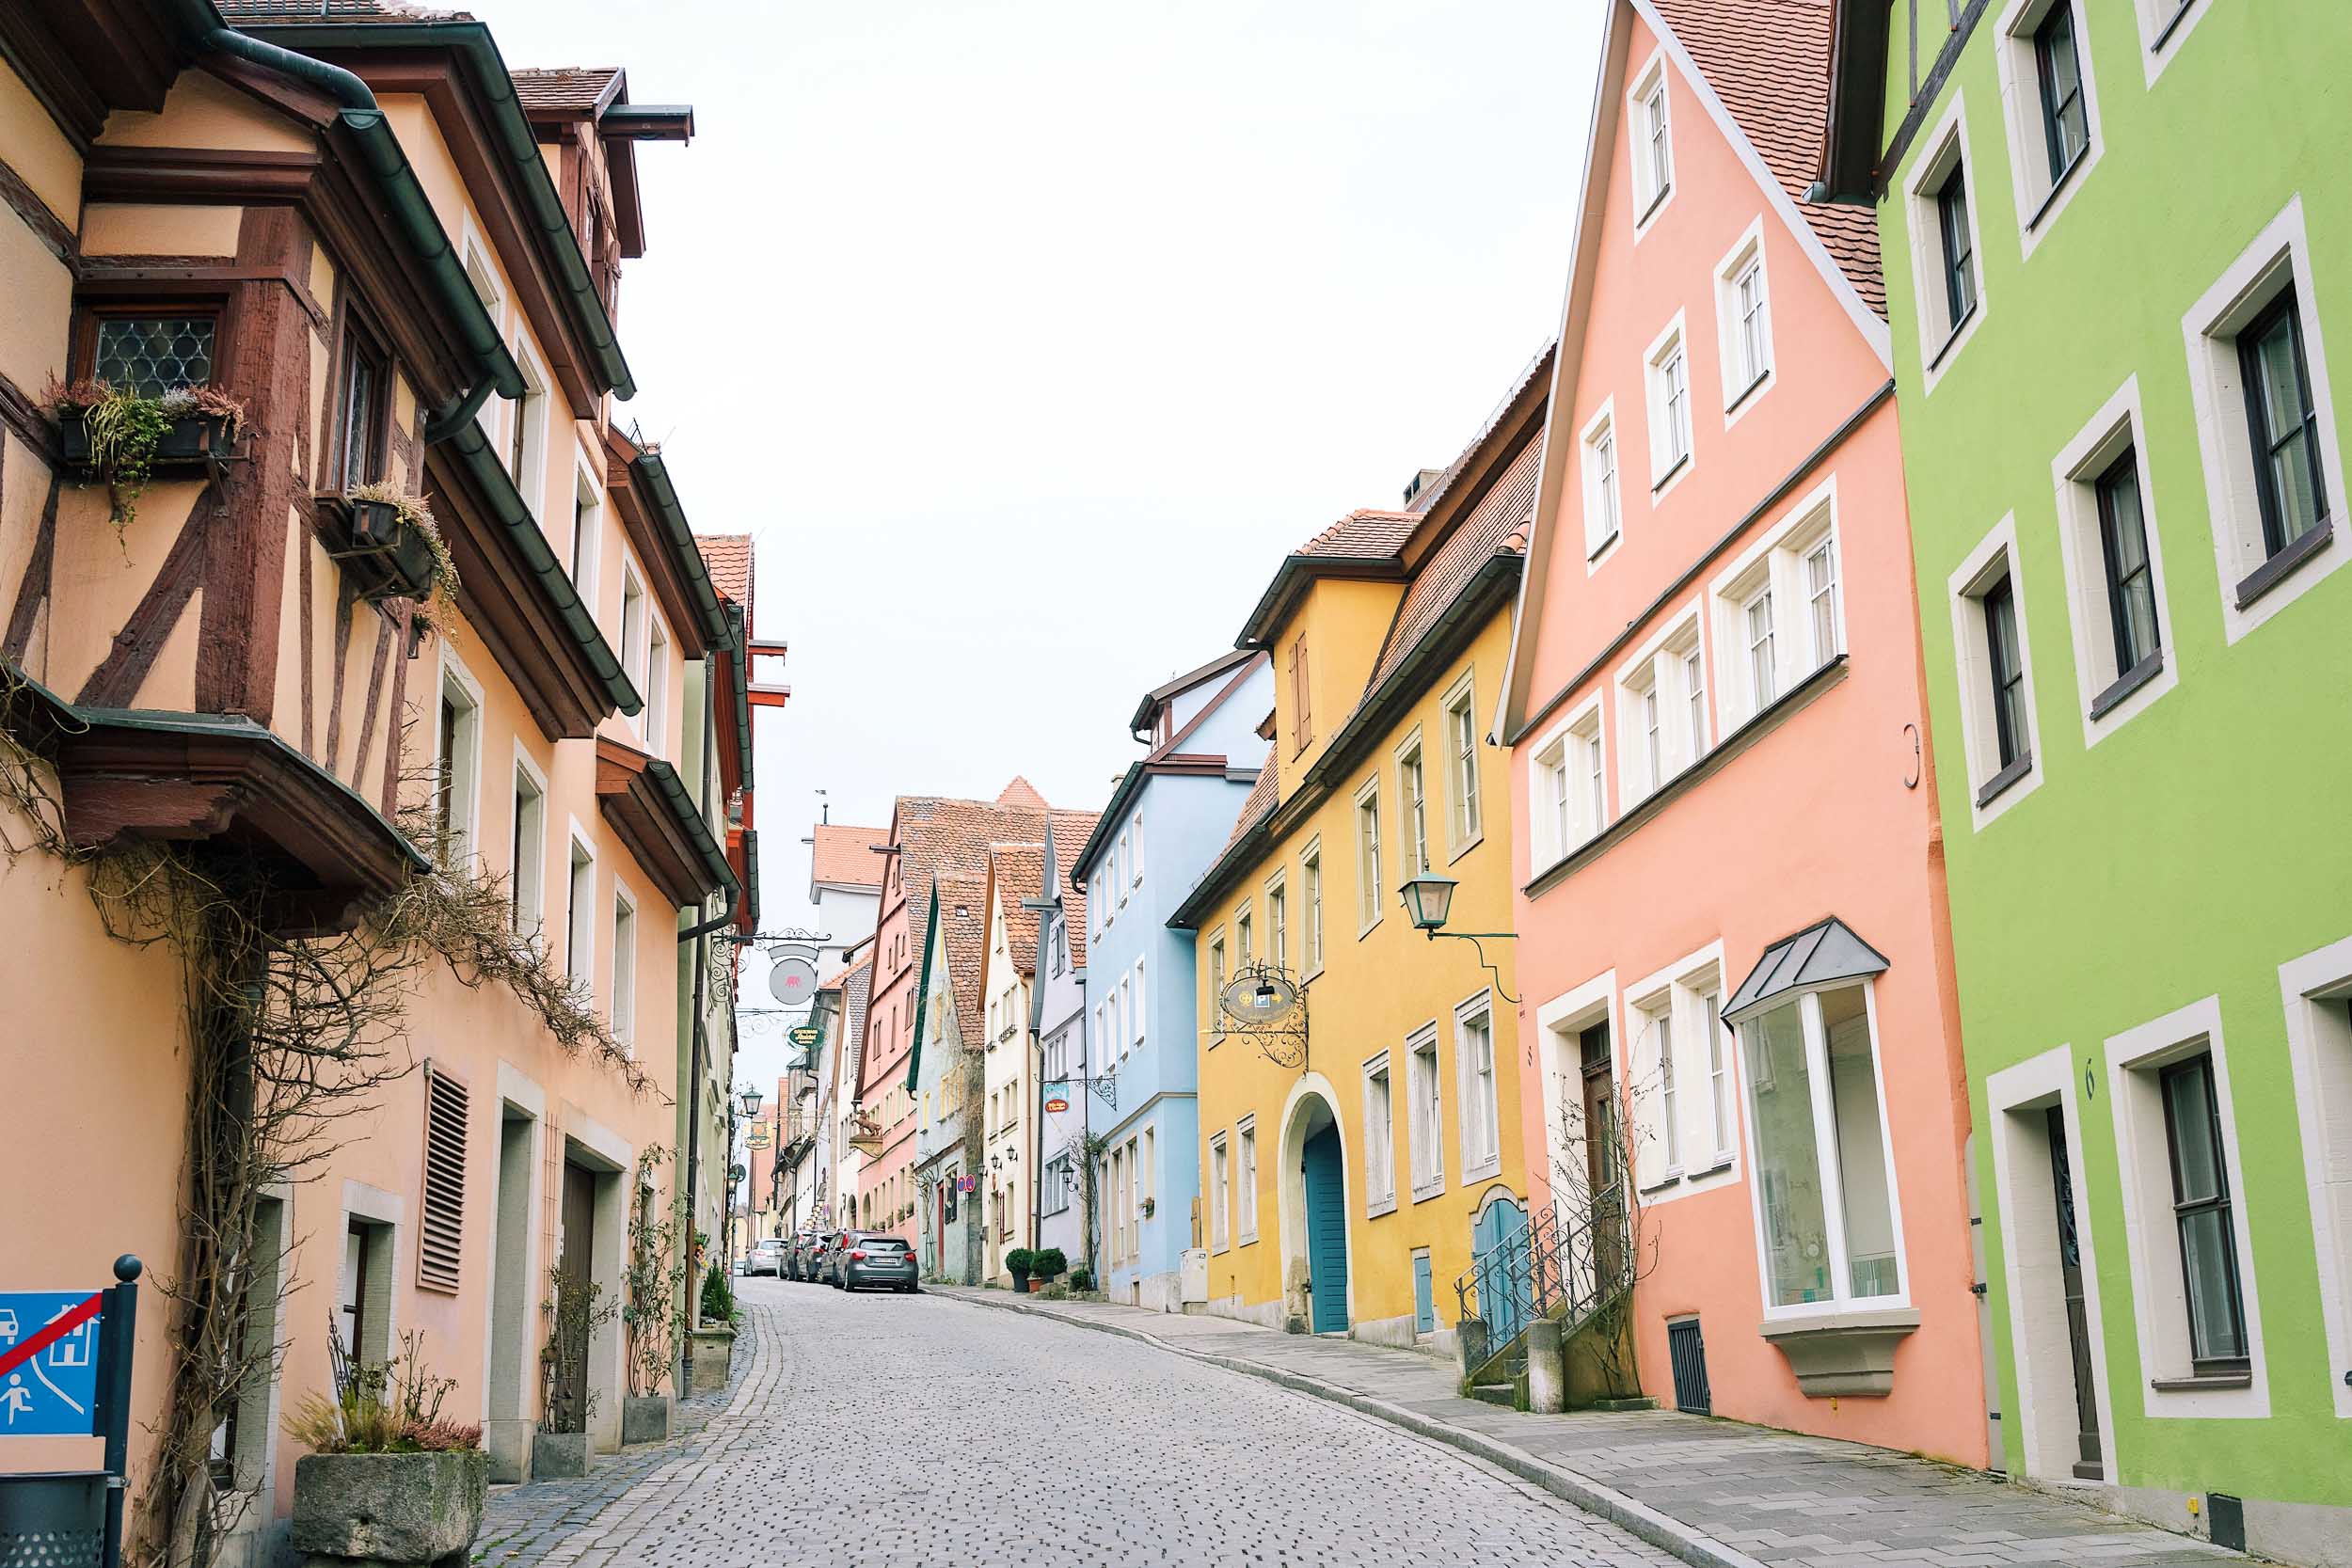 The colorful streets of Rothenburg ob der Tauber